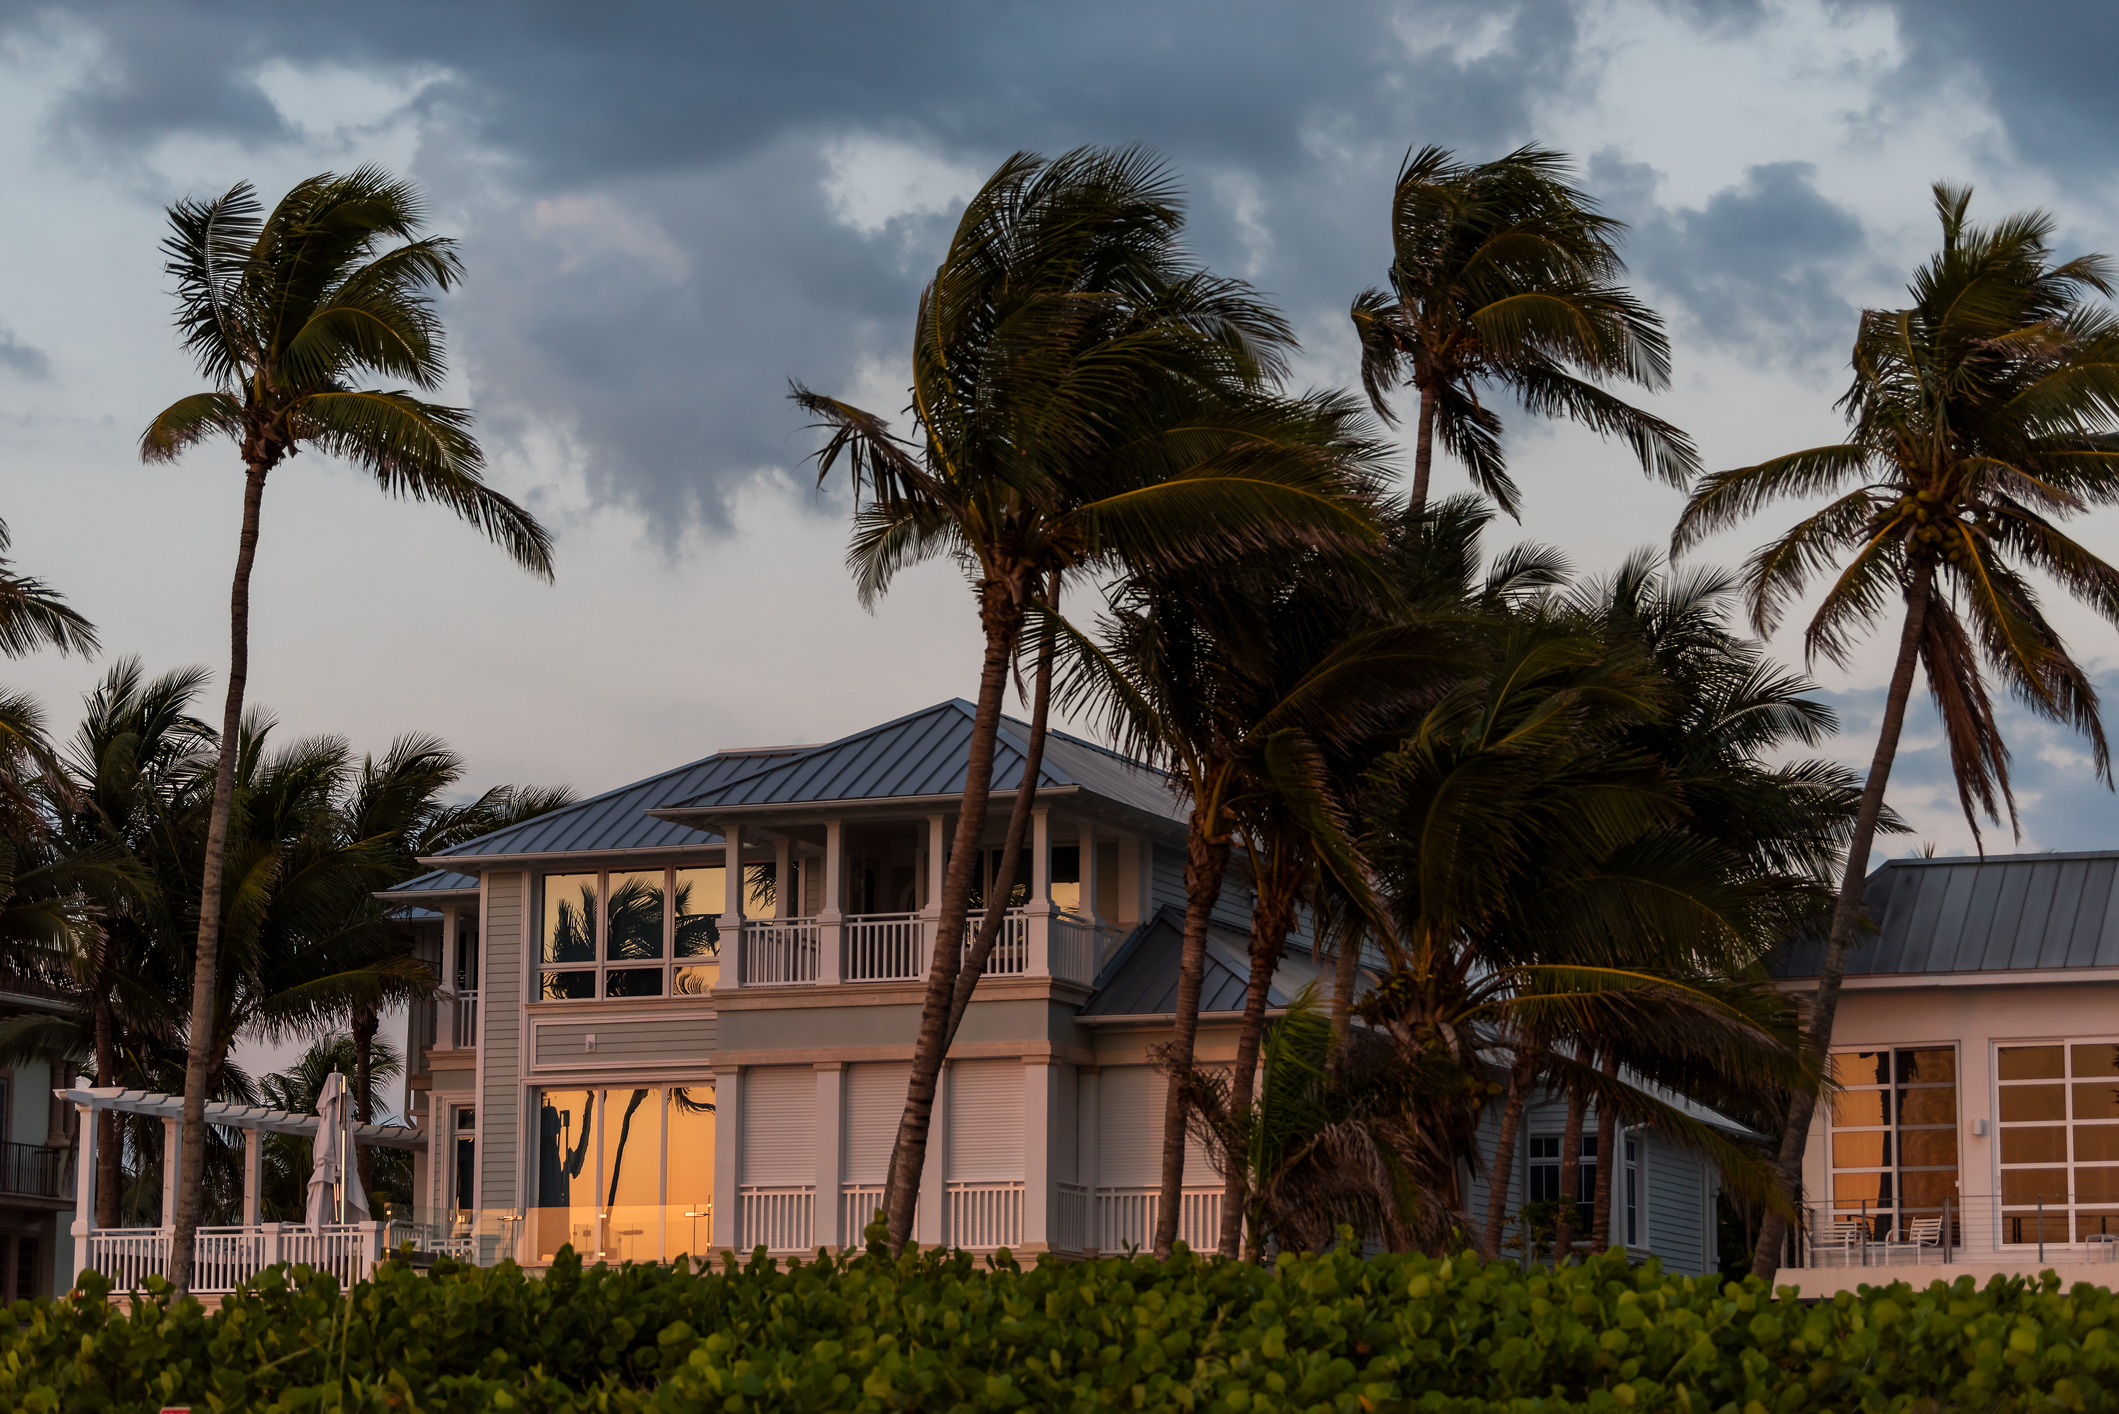 Florida coast beachfront home wit palm trees during evening sunset with stormy weather approaching